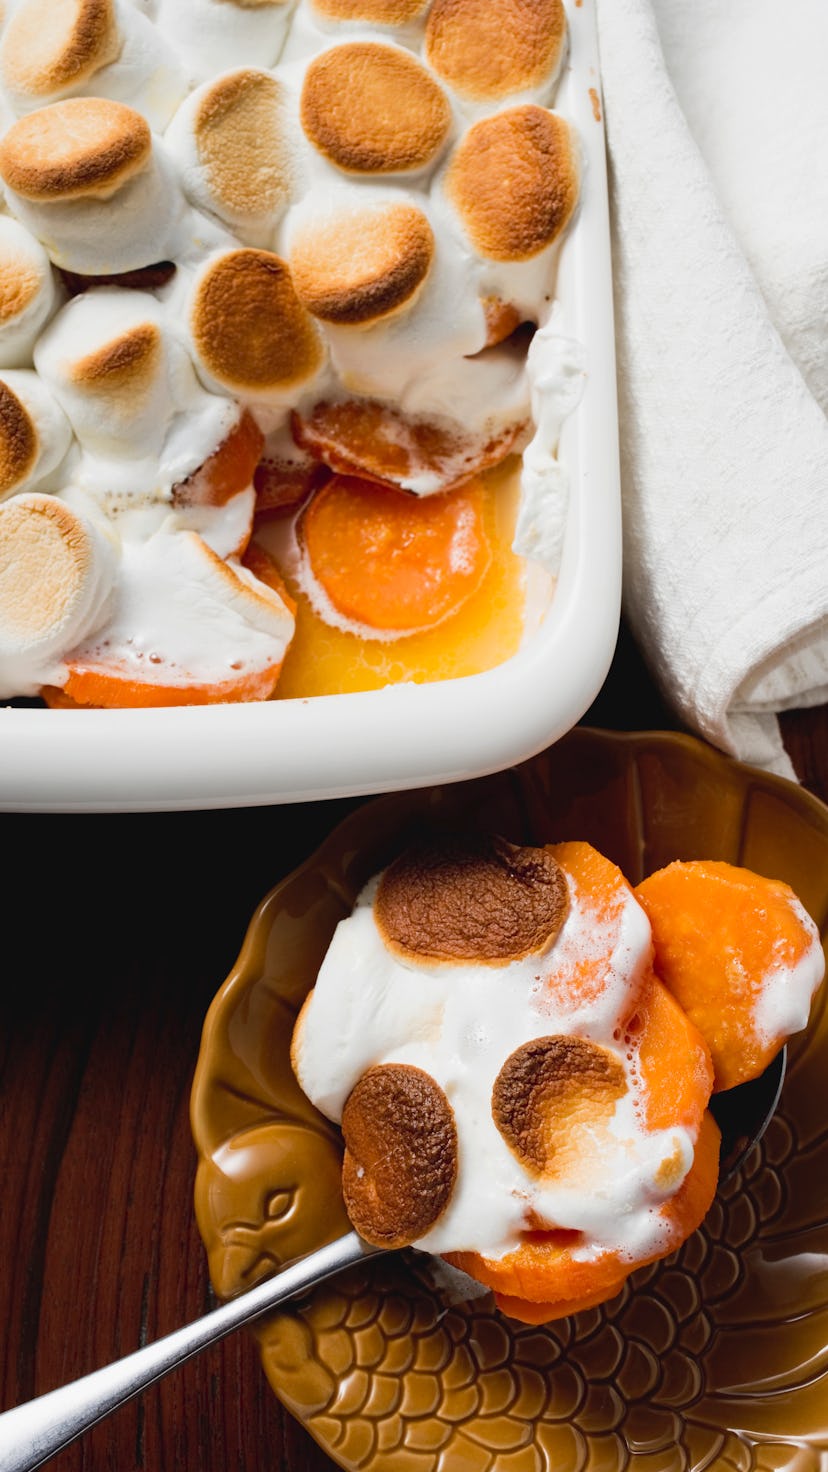 Sweet potato souffle with marshmallows is a great kid-friendly Thanksgiving side.